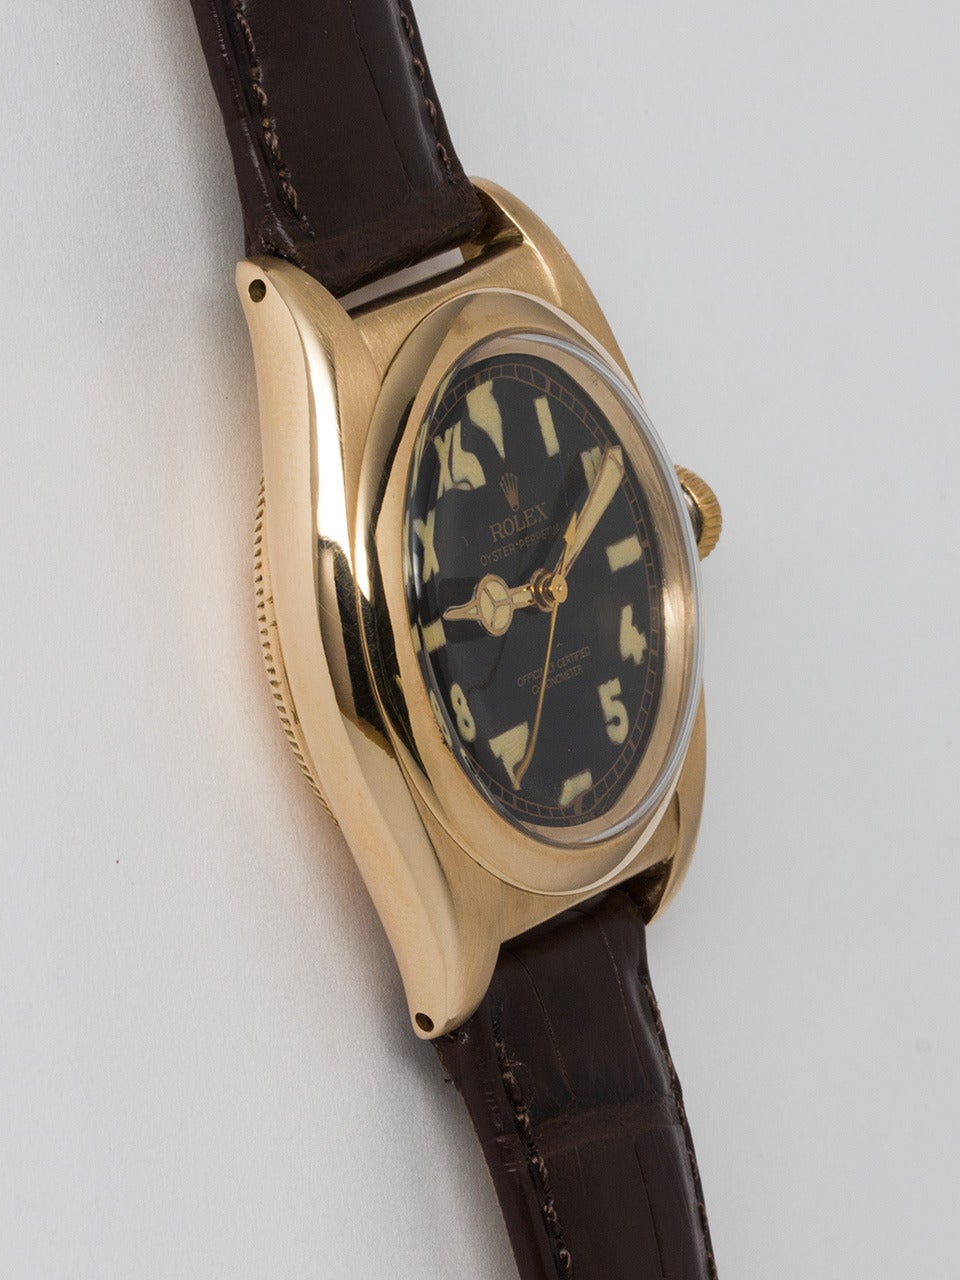 Rolex 14K Yellow Gold Bubbleback Wristwatch circa 1940s. 32mm diameter case with smooth bezel and acrylic crystal. Beautifully restored glossy black so called 